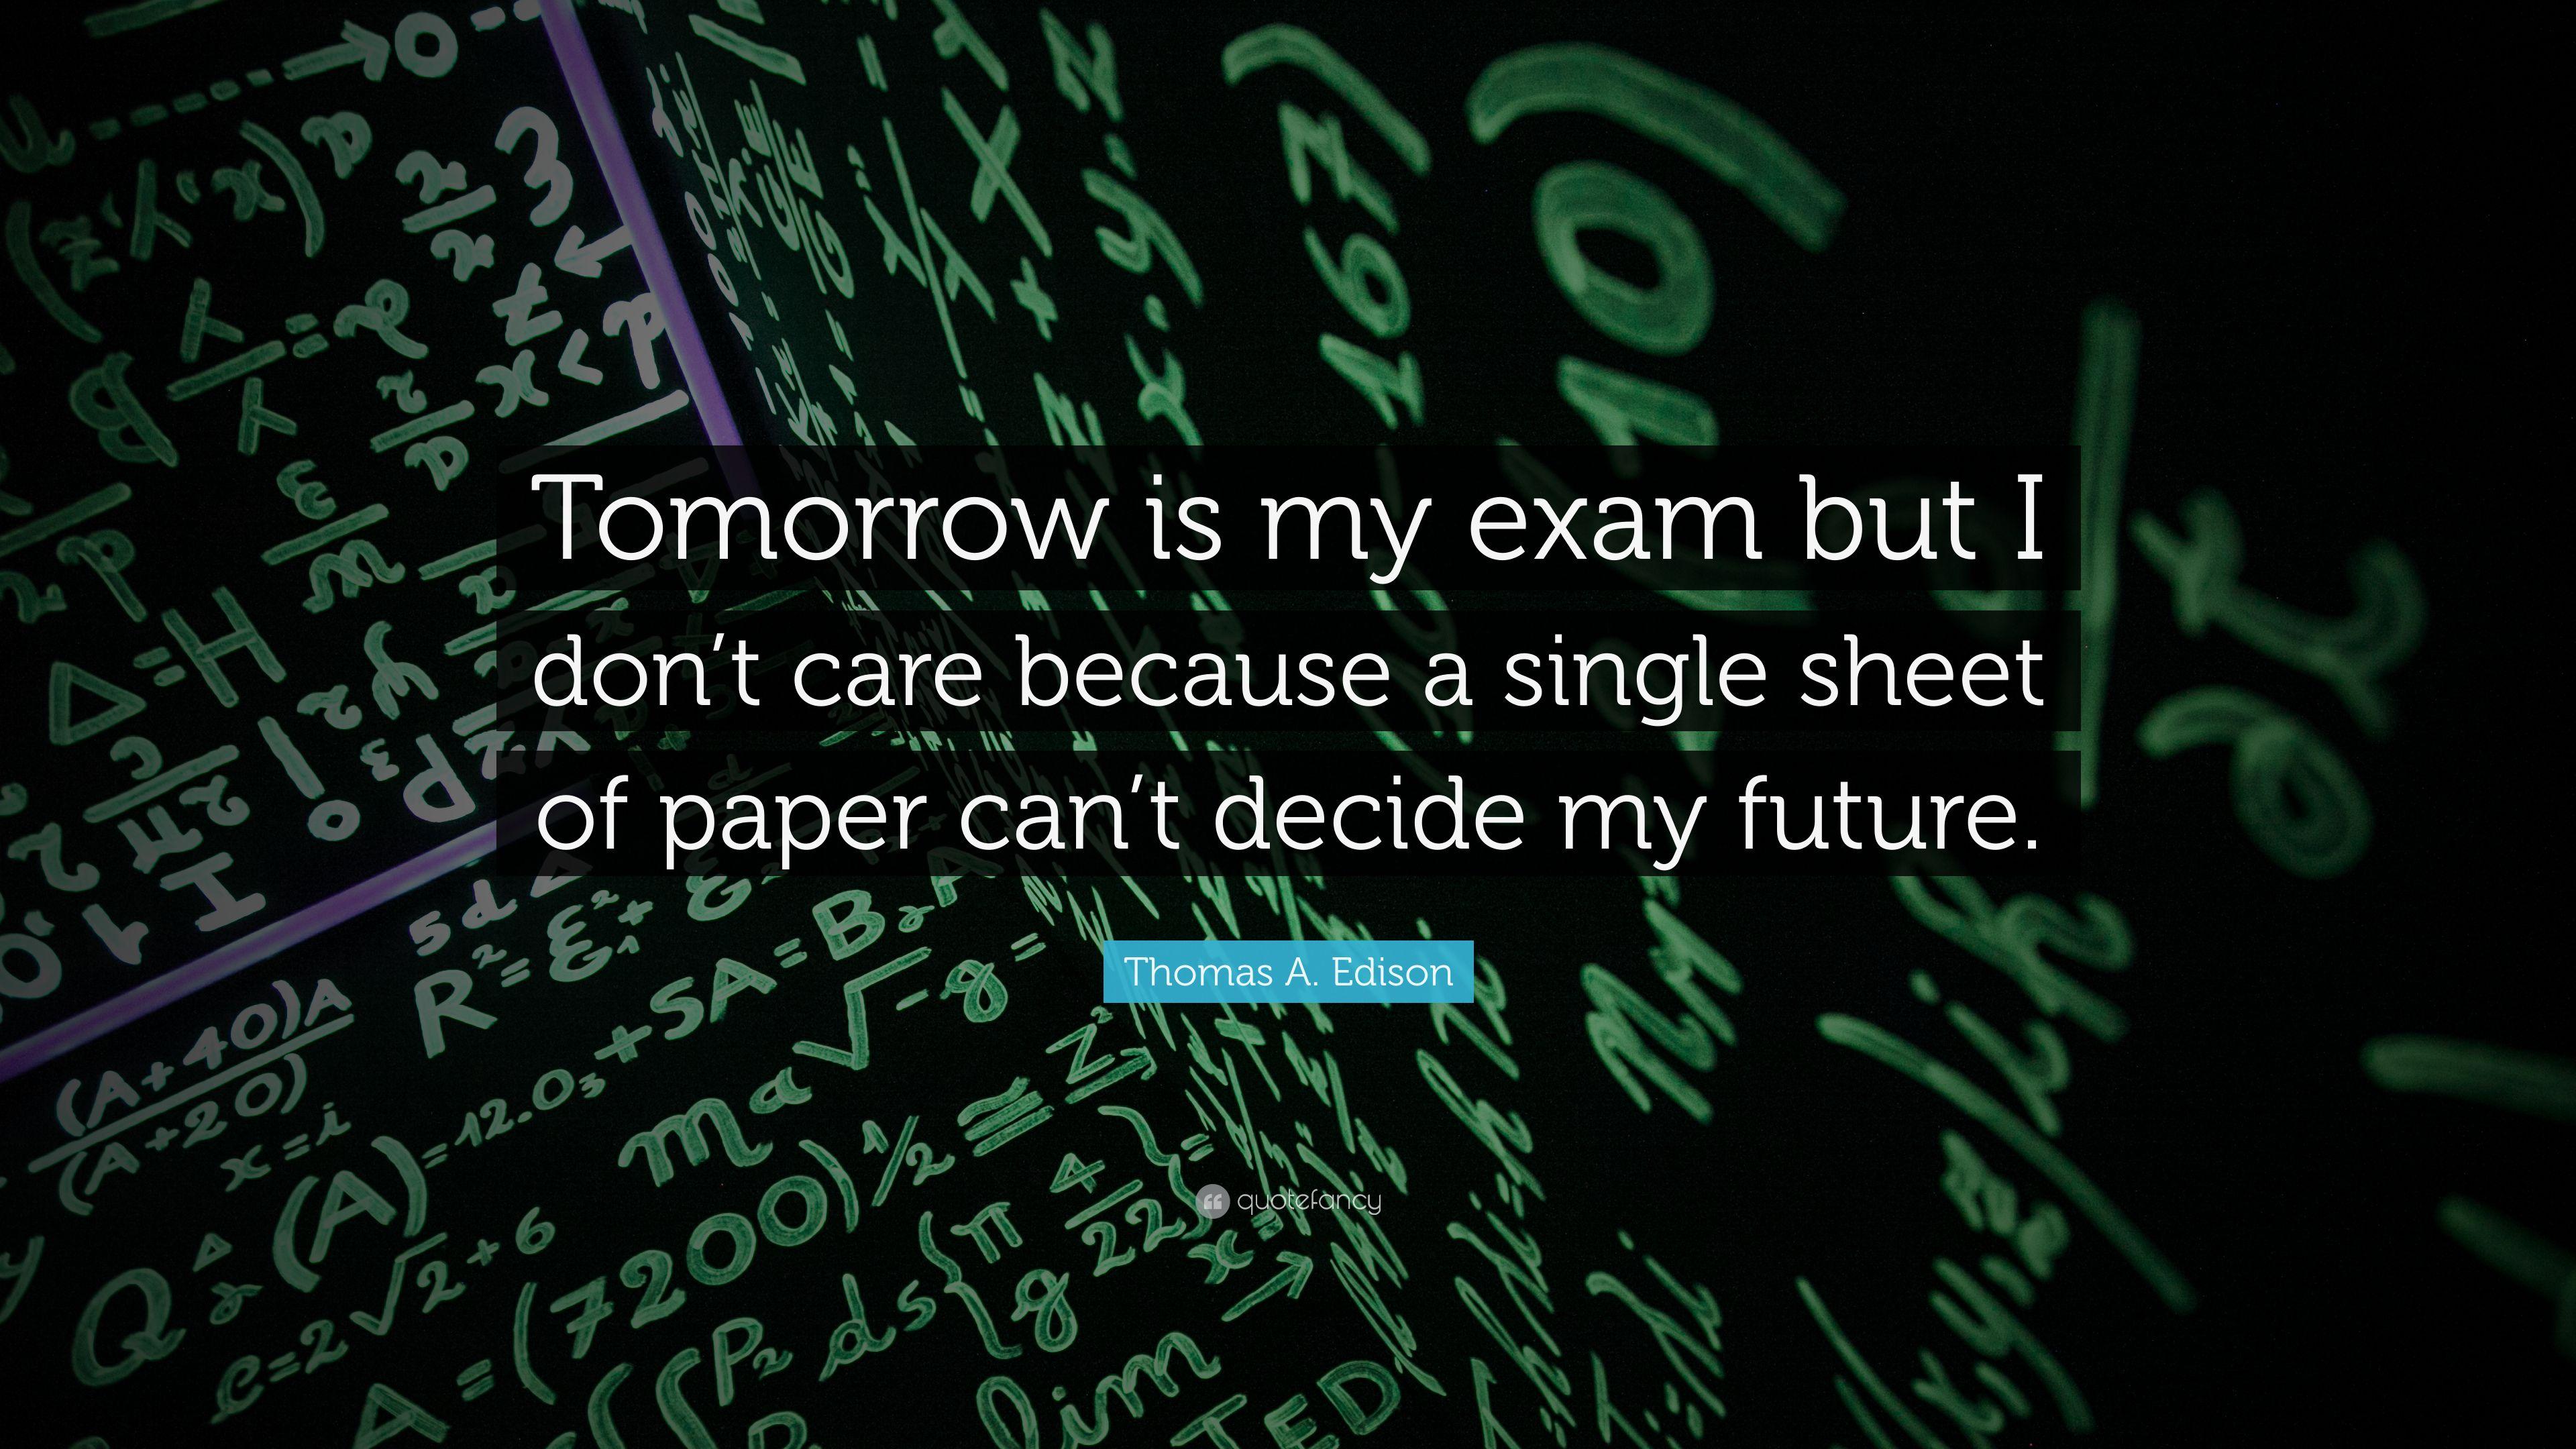 Thomas A. Edison Quote: “Tomorrow is my exam but I don't care